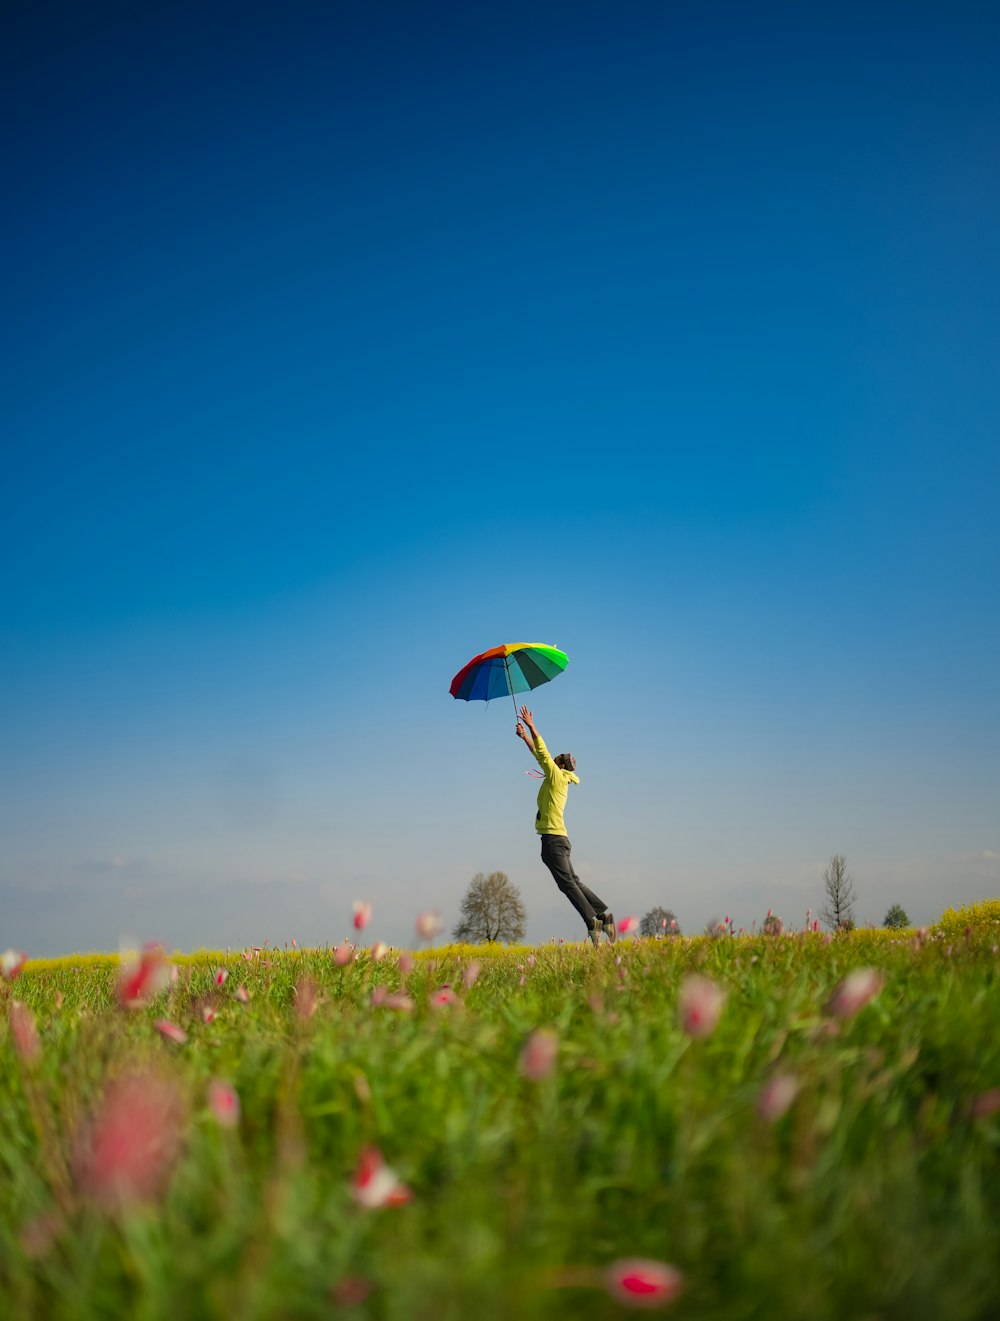 a person jumping in the air while holding a kite